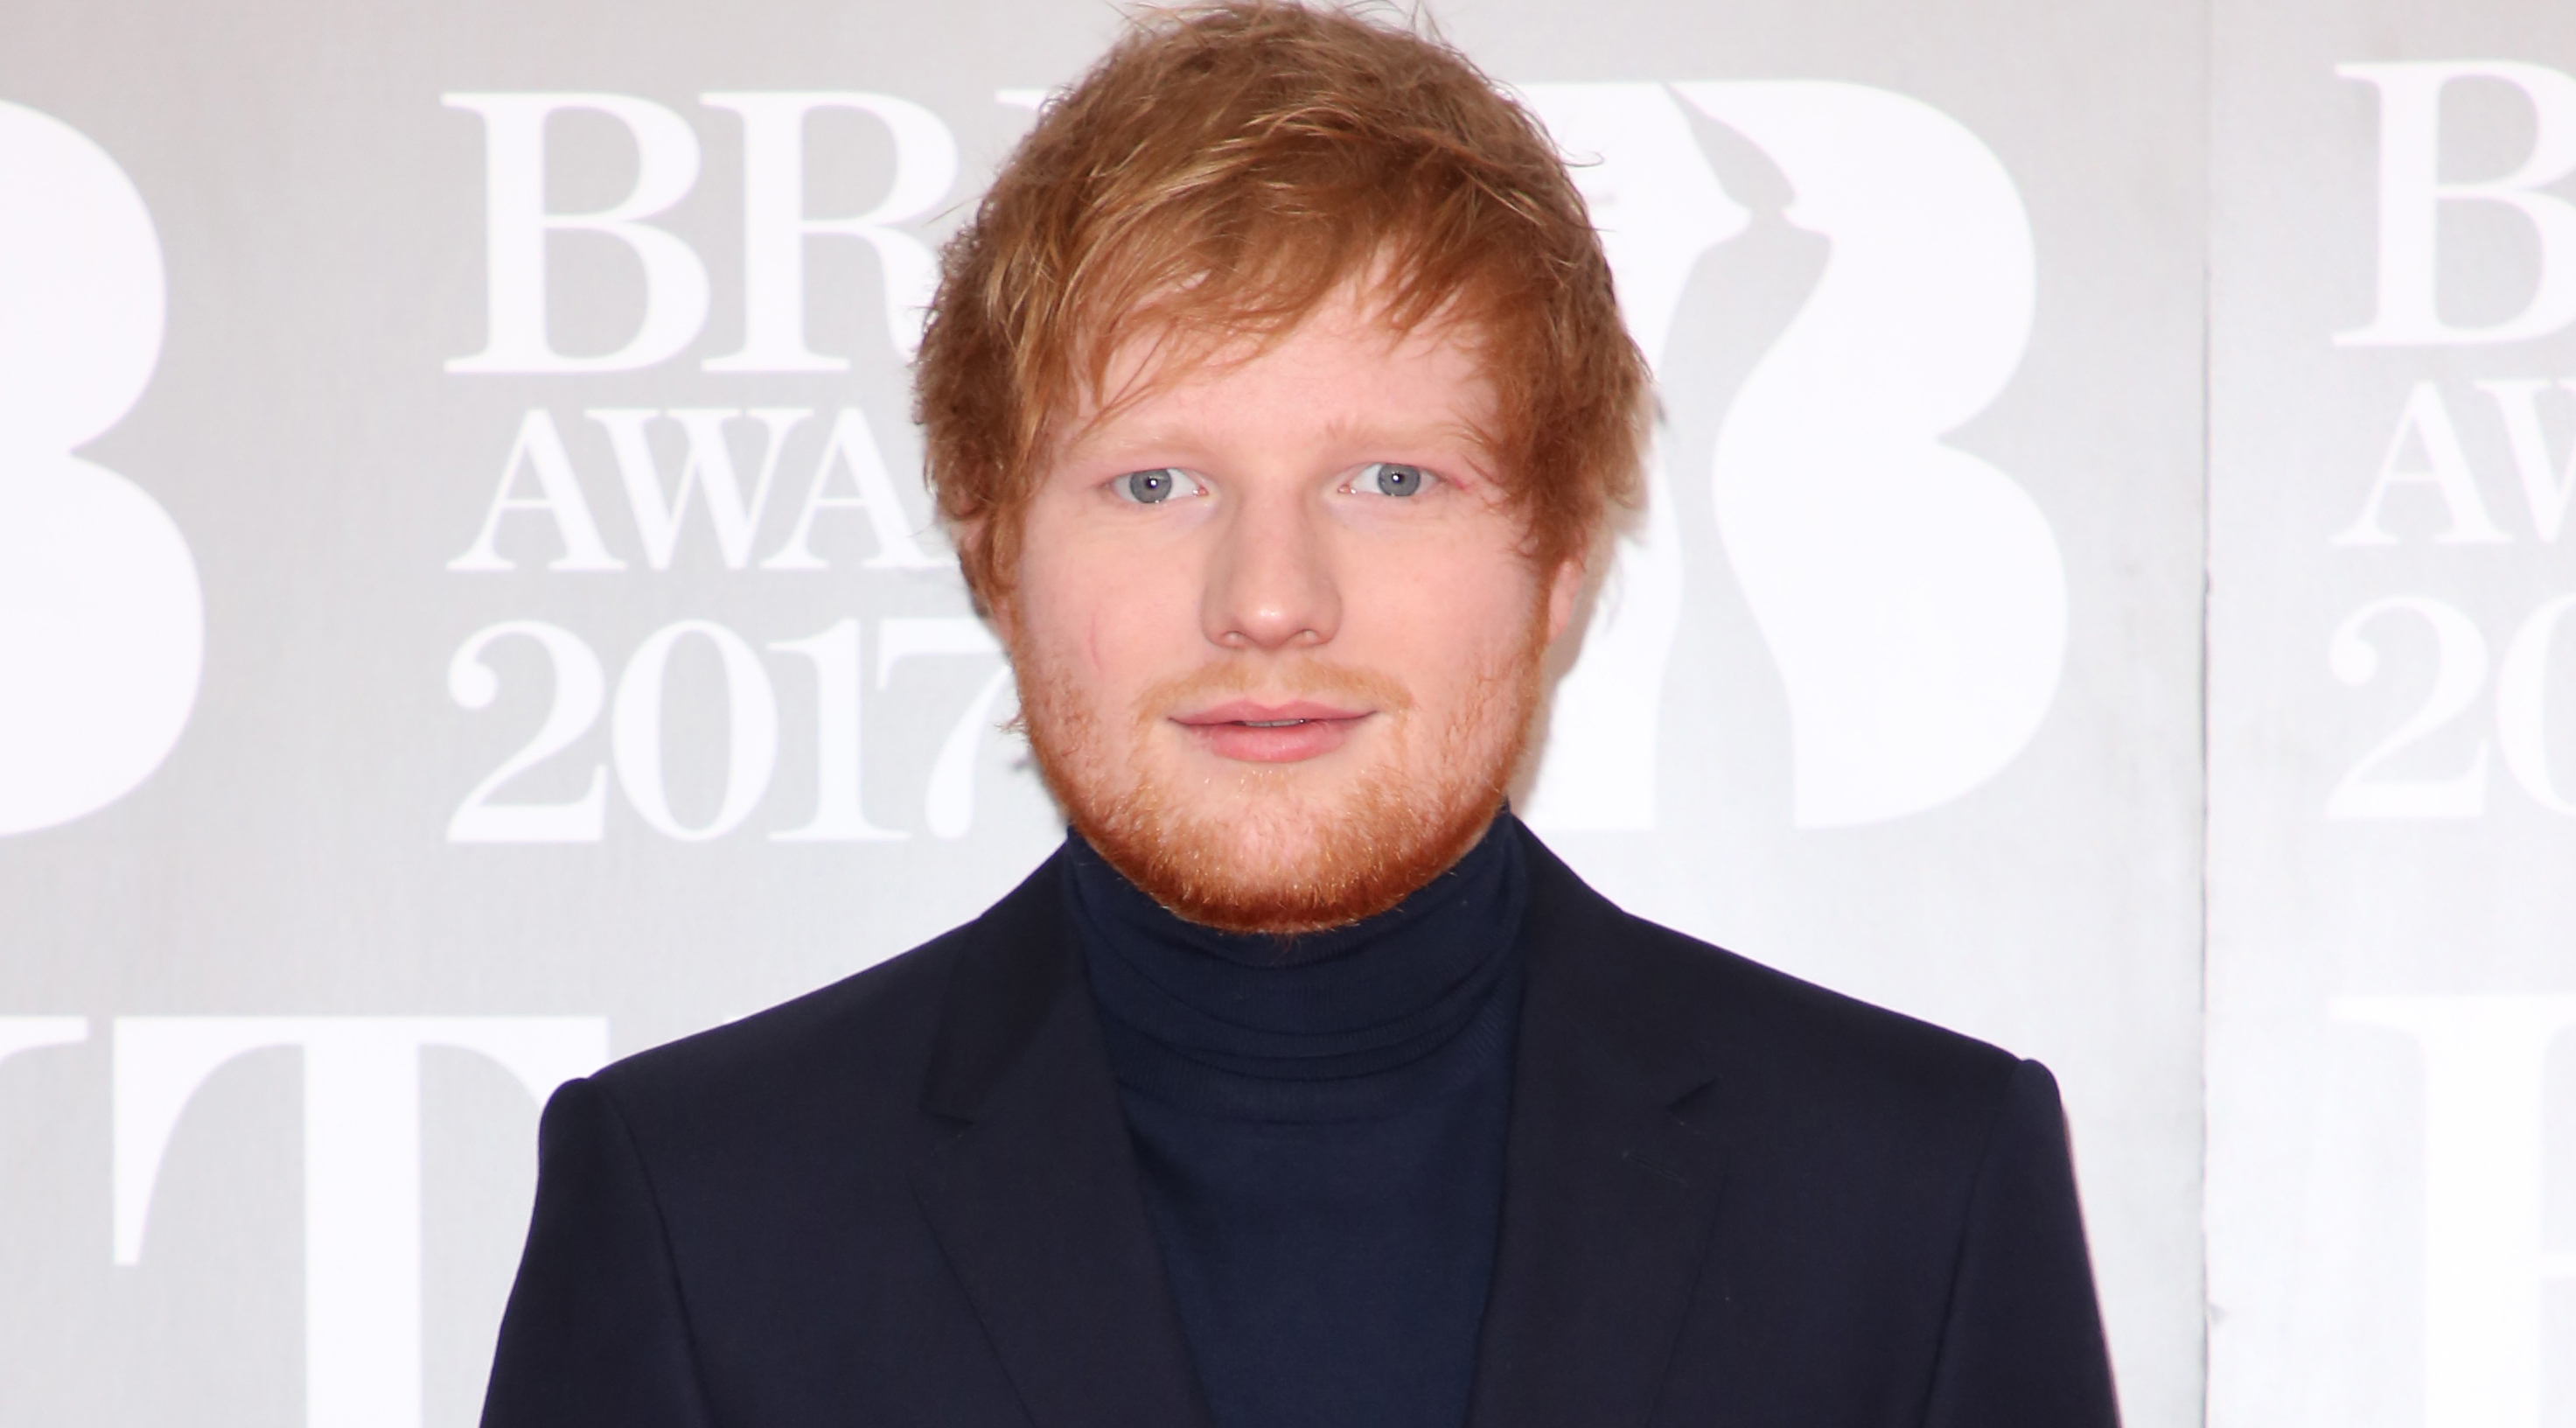 Ed Sheeran to Appear on ‘Game of Thrones’